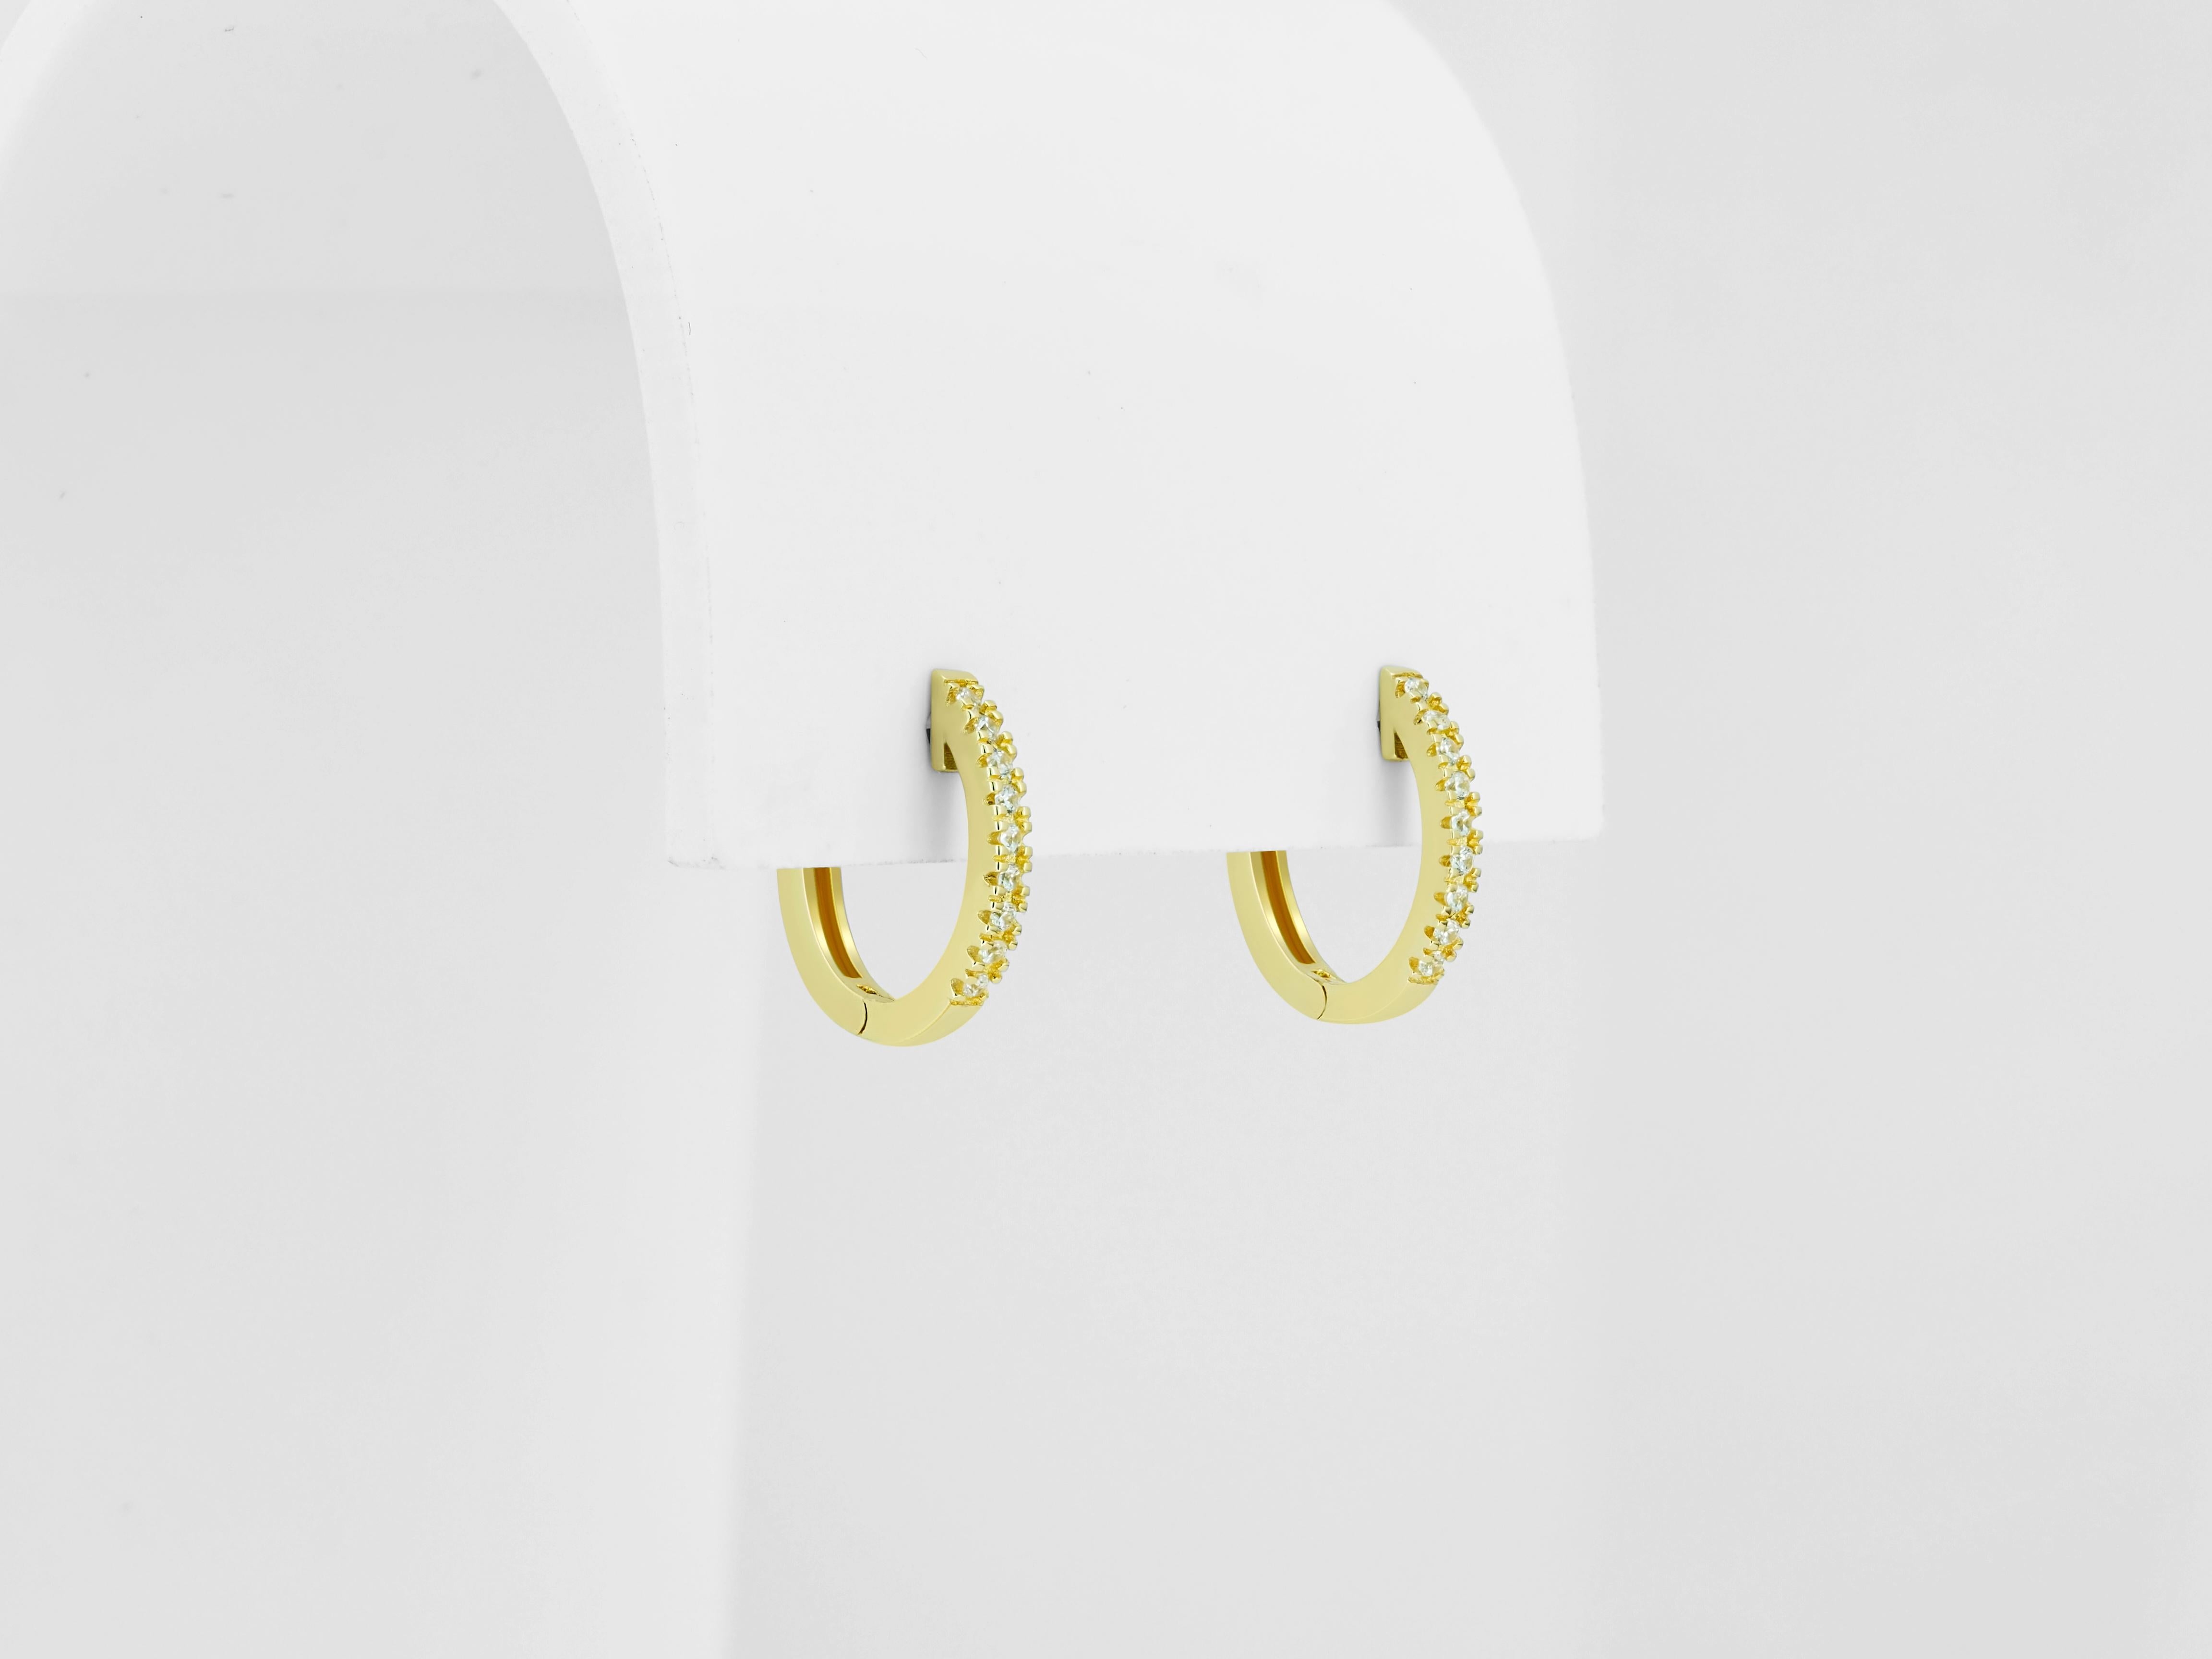 Modern Diamond Hoop Earrings and Citrine Briolette Charms in 14k Gold For Sale